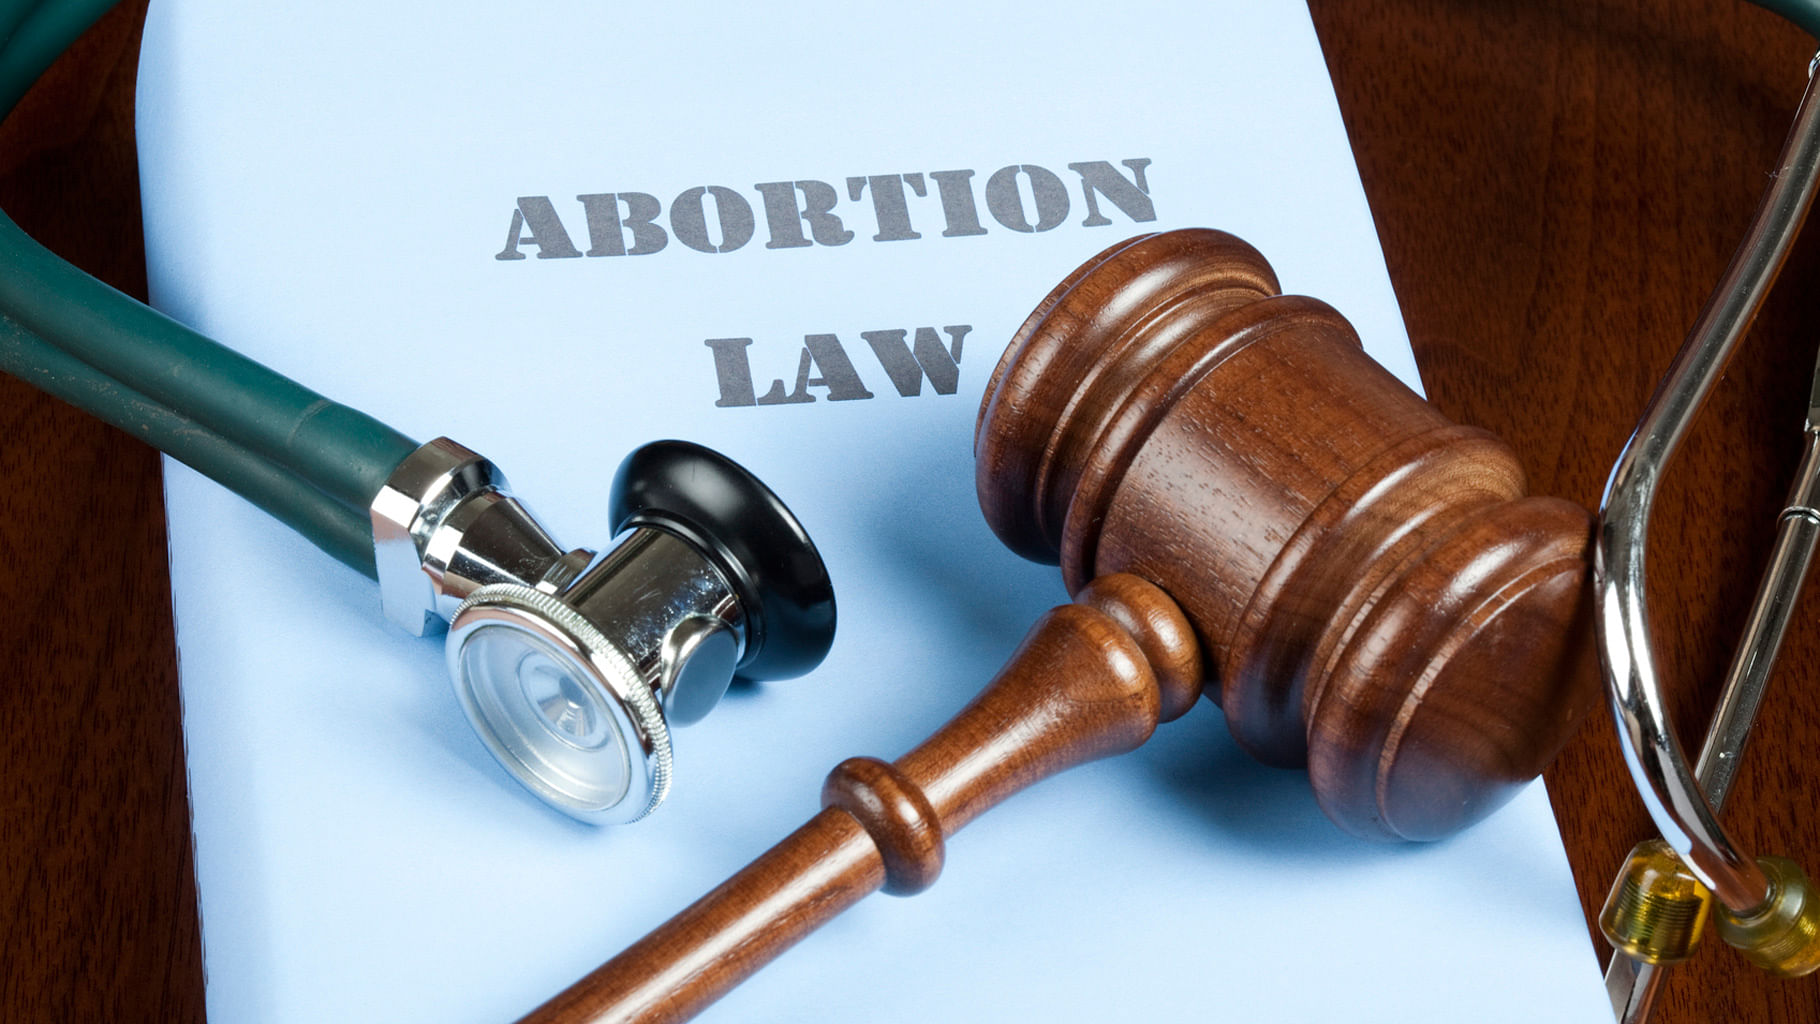 Currently, the law allows medical abortion till 20 weeks of pregnancy. Image used for representation. (Photo: iStockphoto)